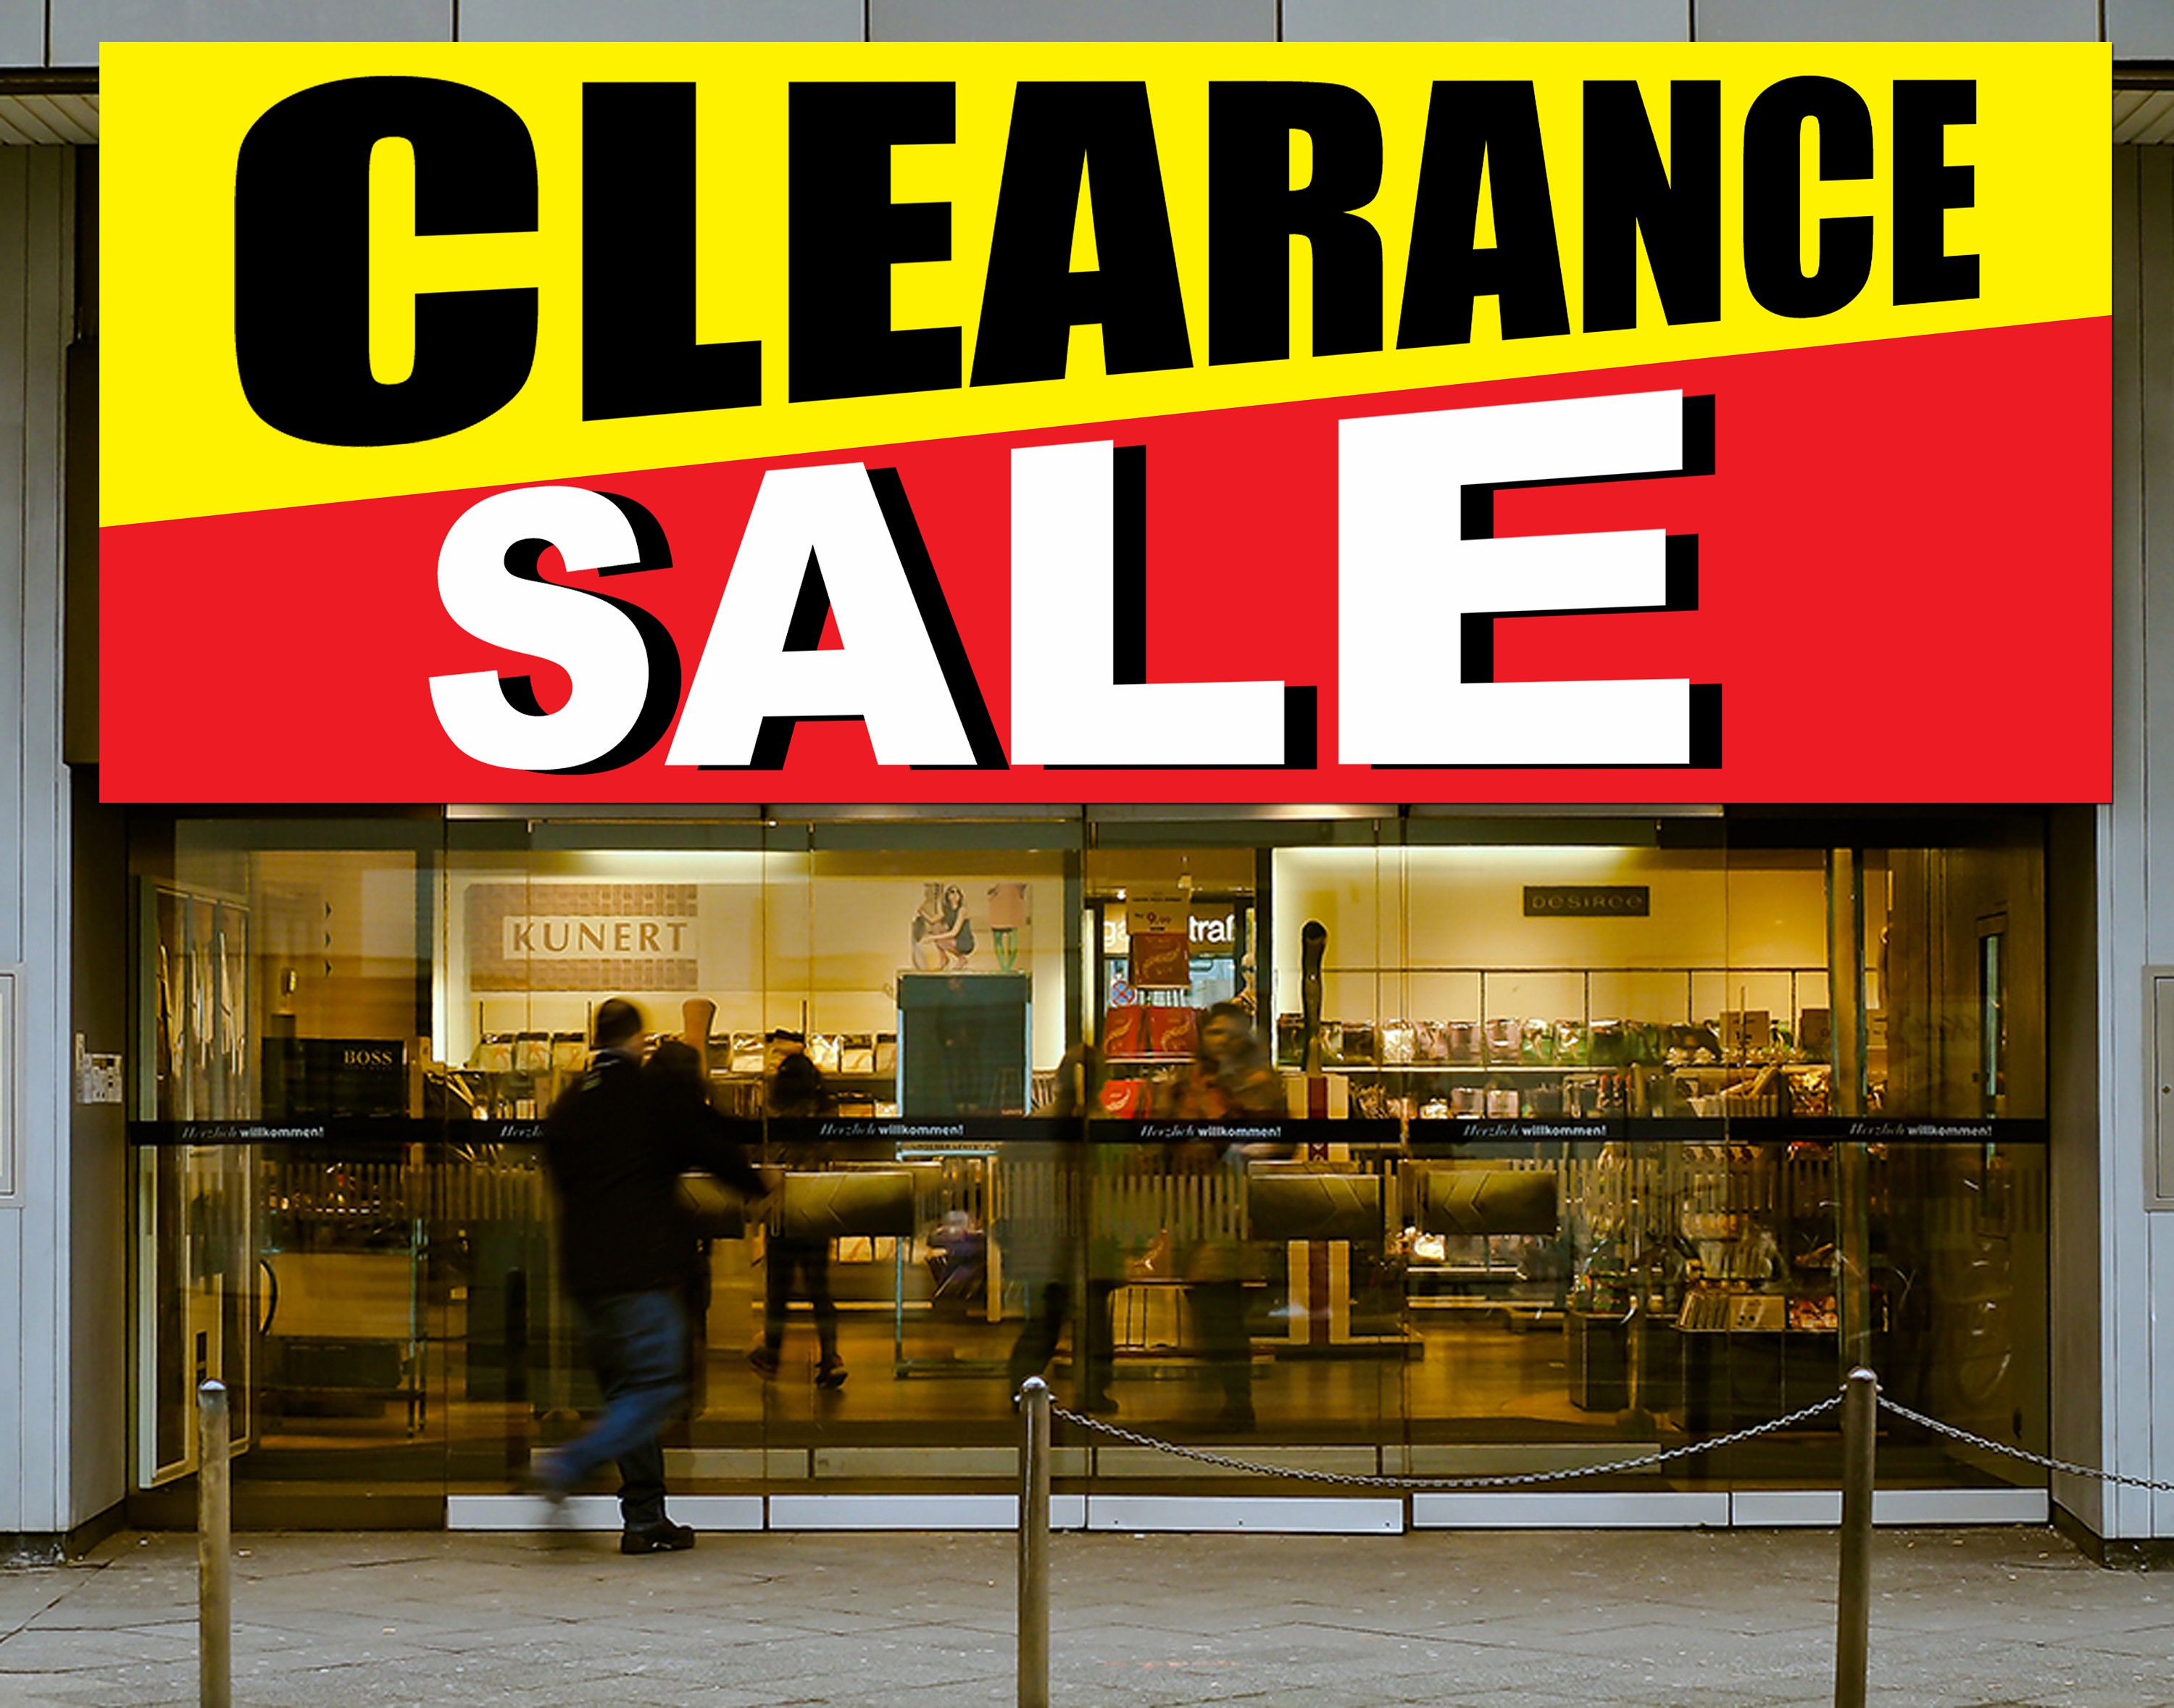 CLEARANCE SALE - Vinyl Banner Store Clearance Sign 20x48 Inch - ryb